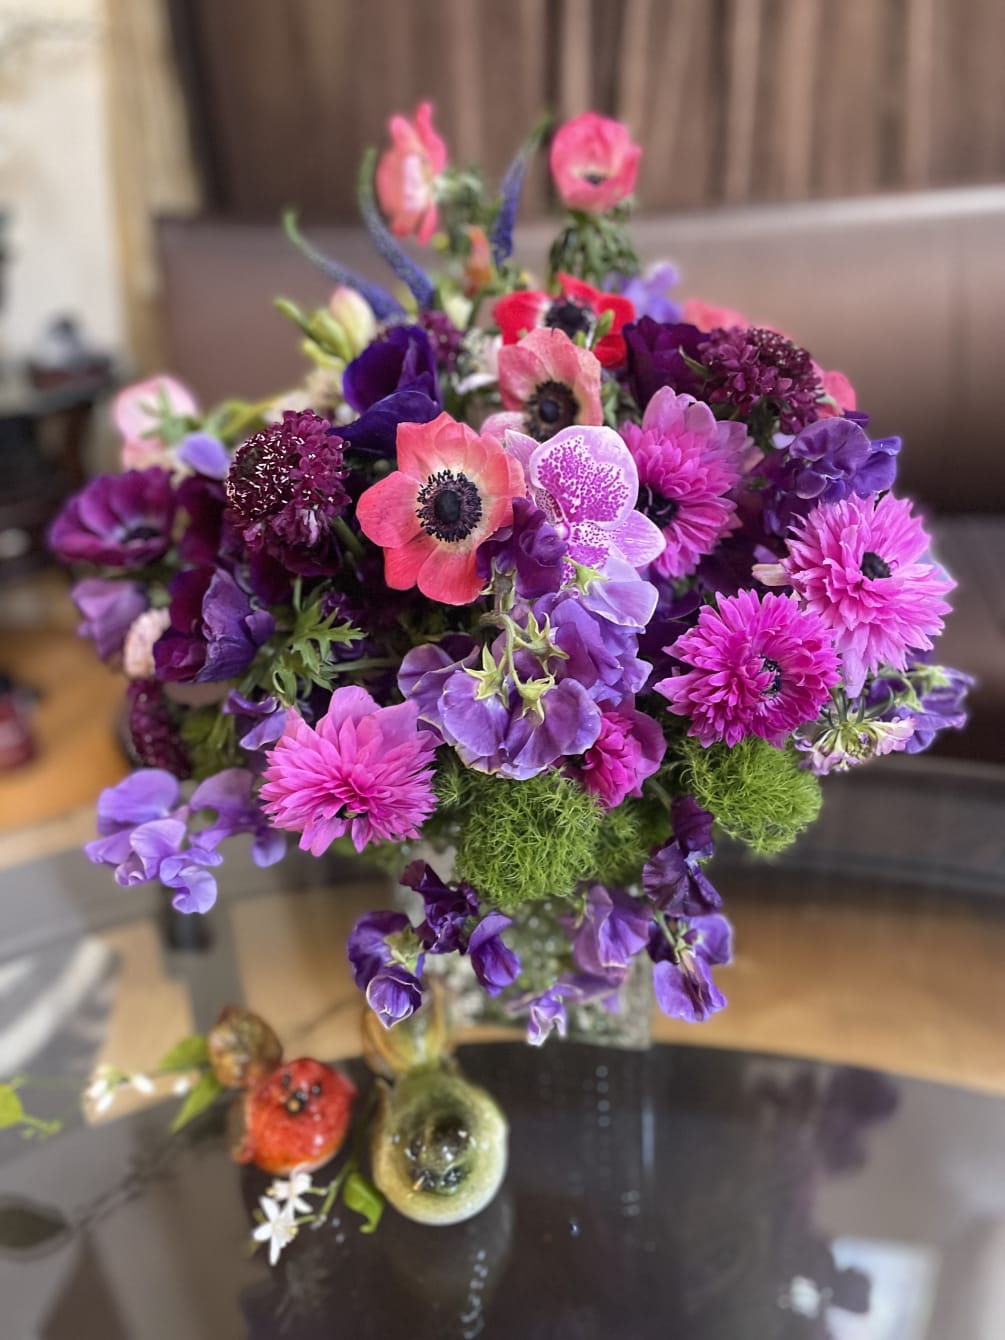  Imagine a beautiful arrangement of pink and purple spring flowers, including